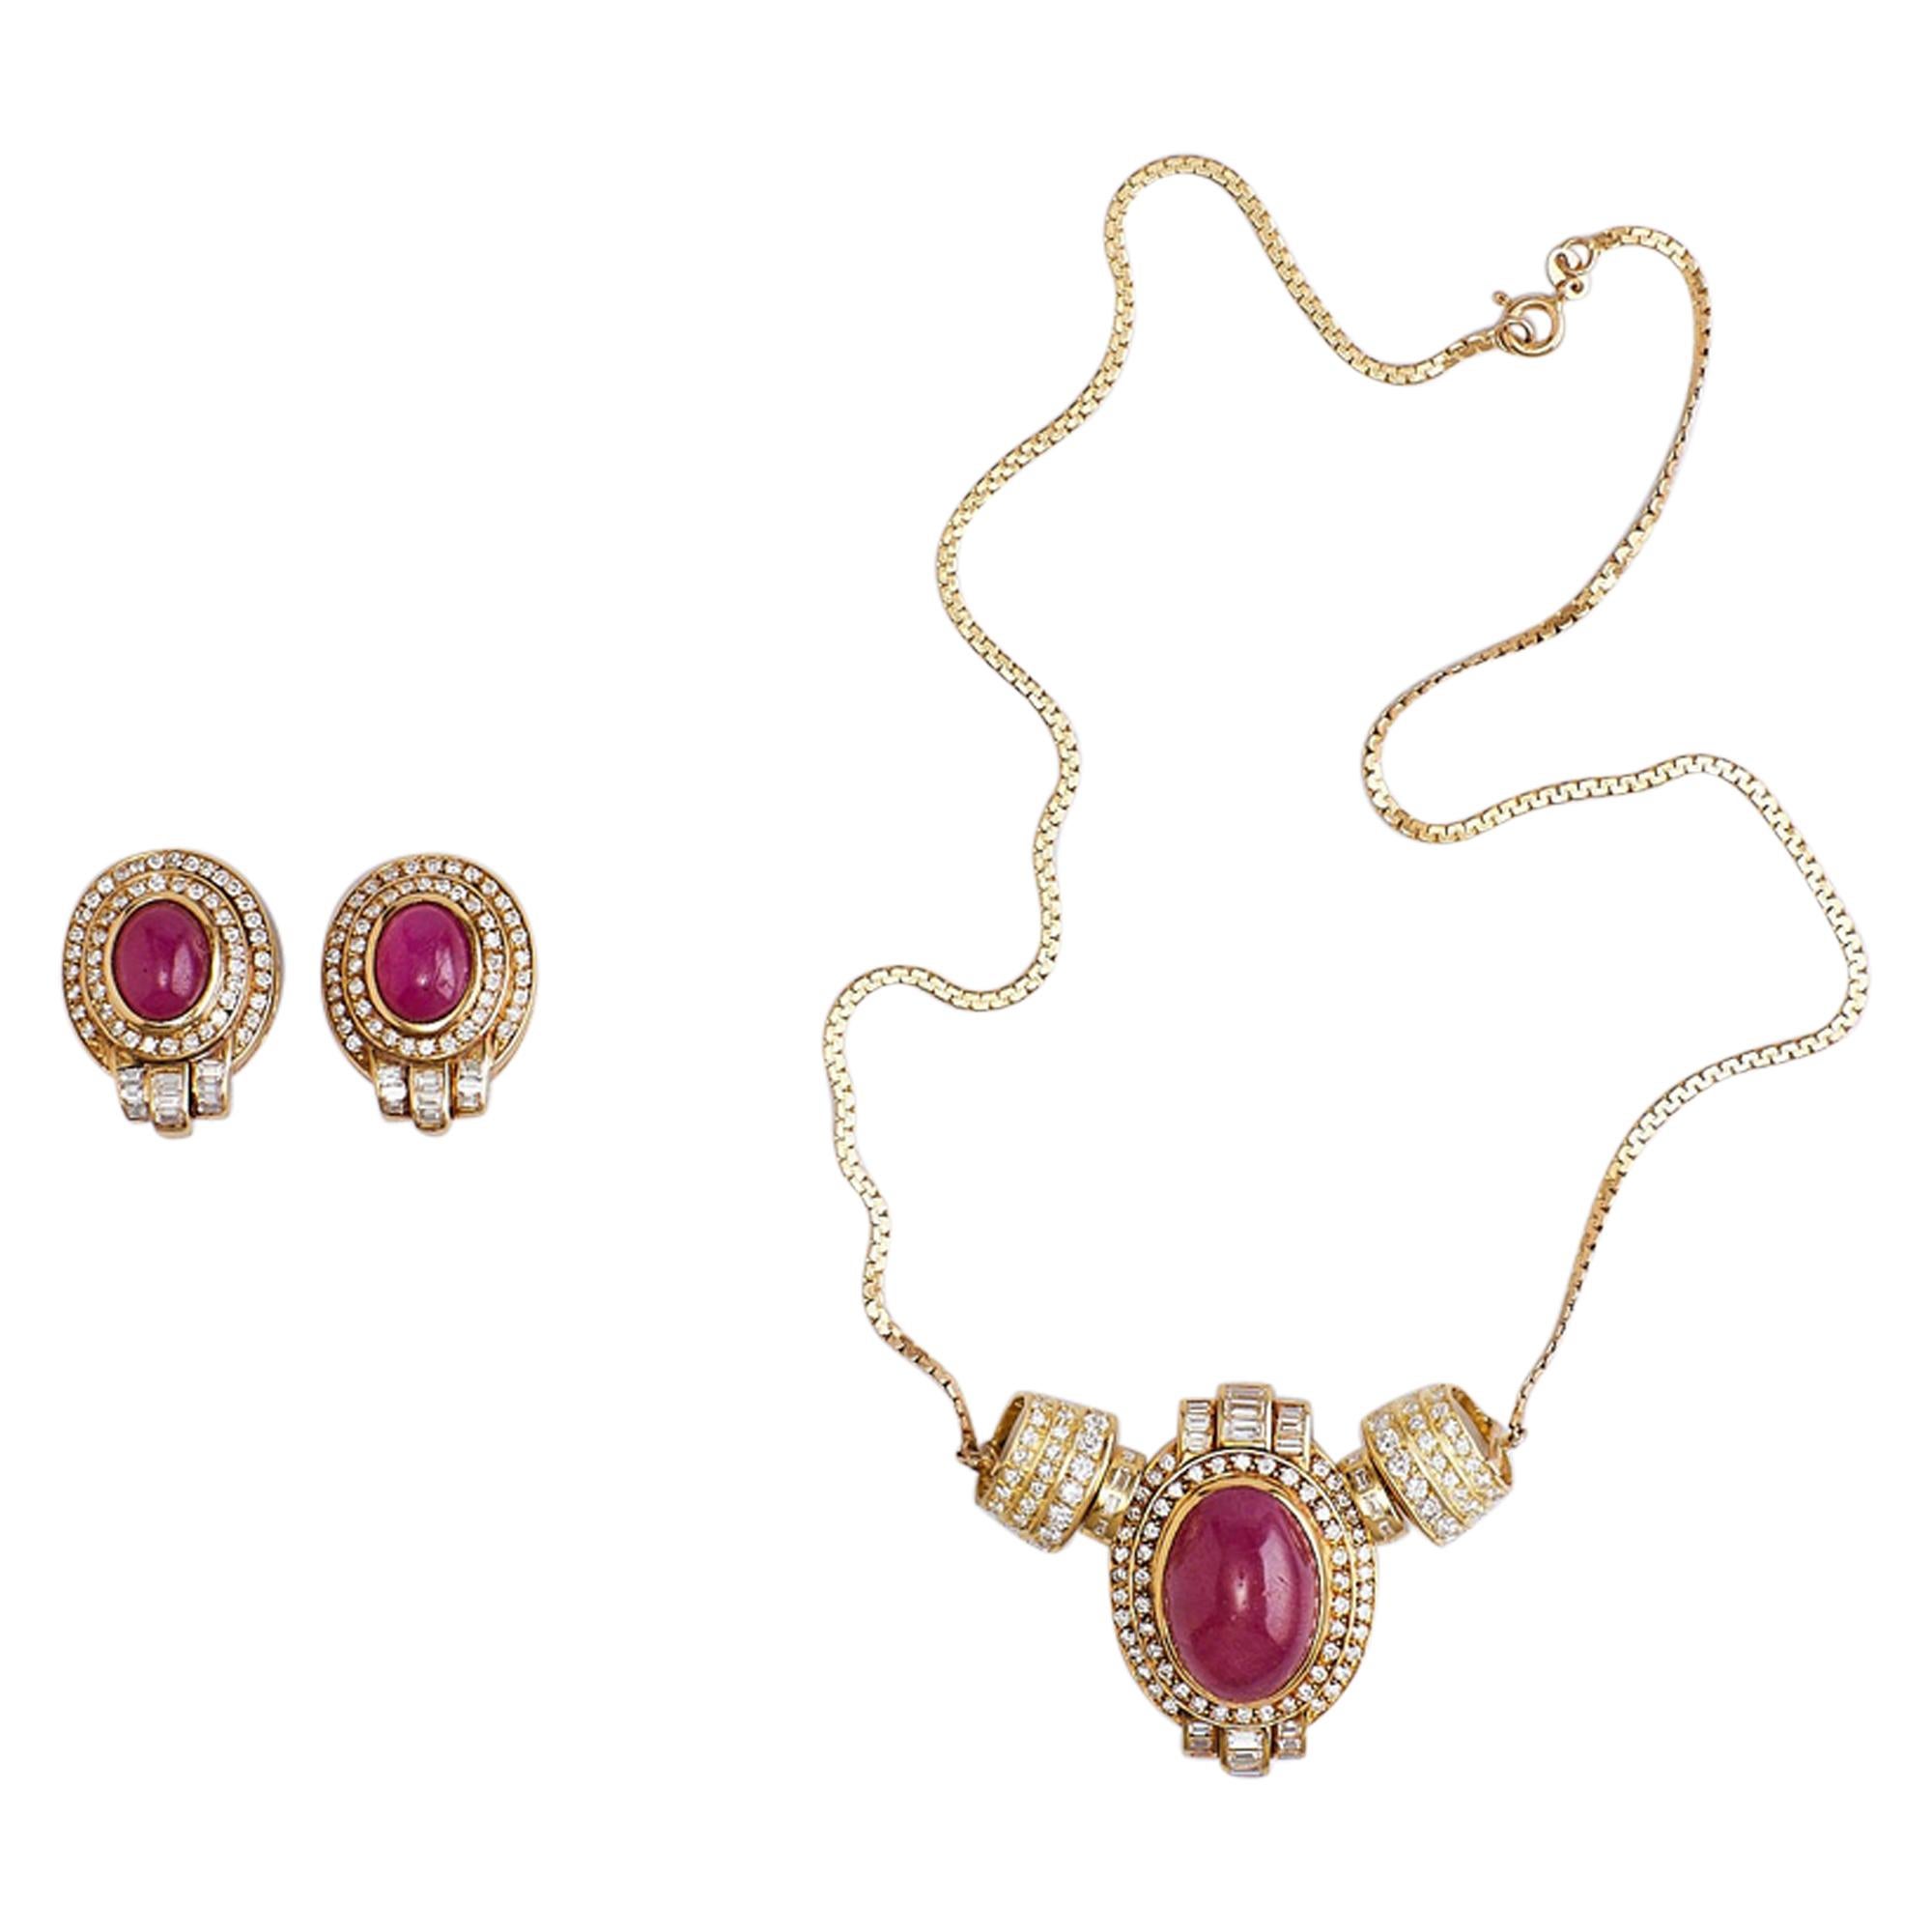 Set of 14 Karat Gold, Ruby and Diamonds Pendant with Chain and Earrings